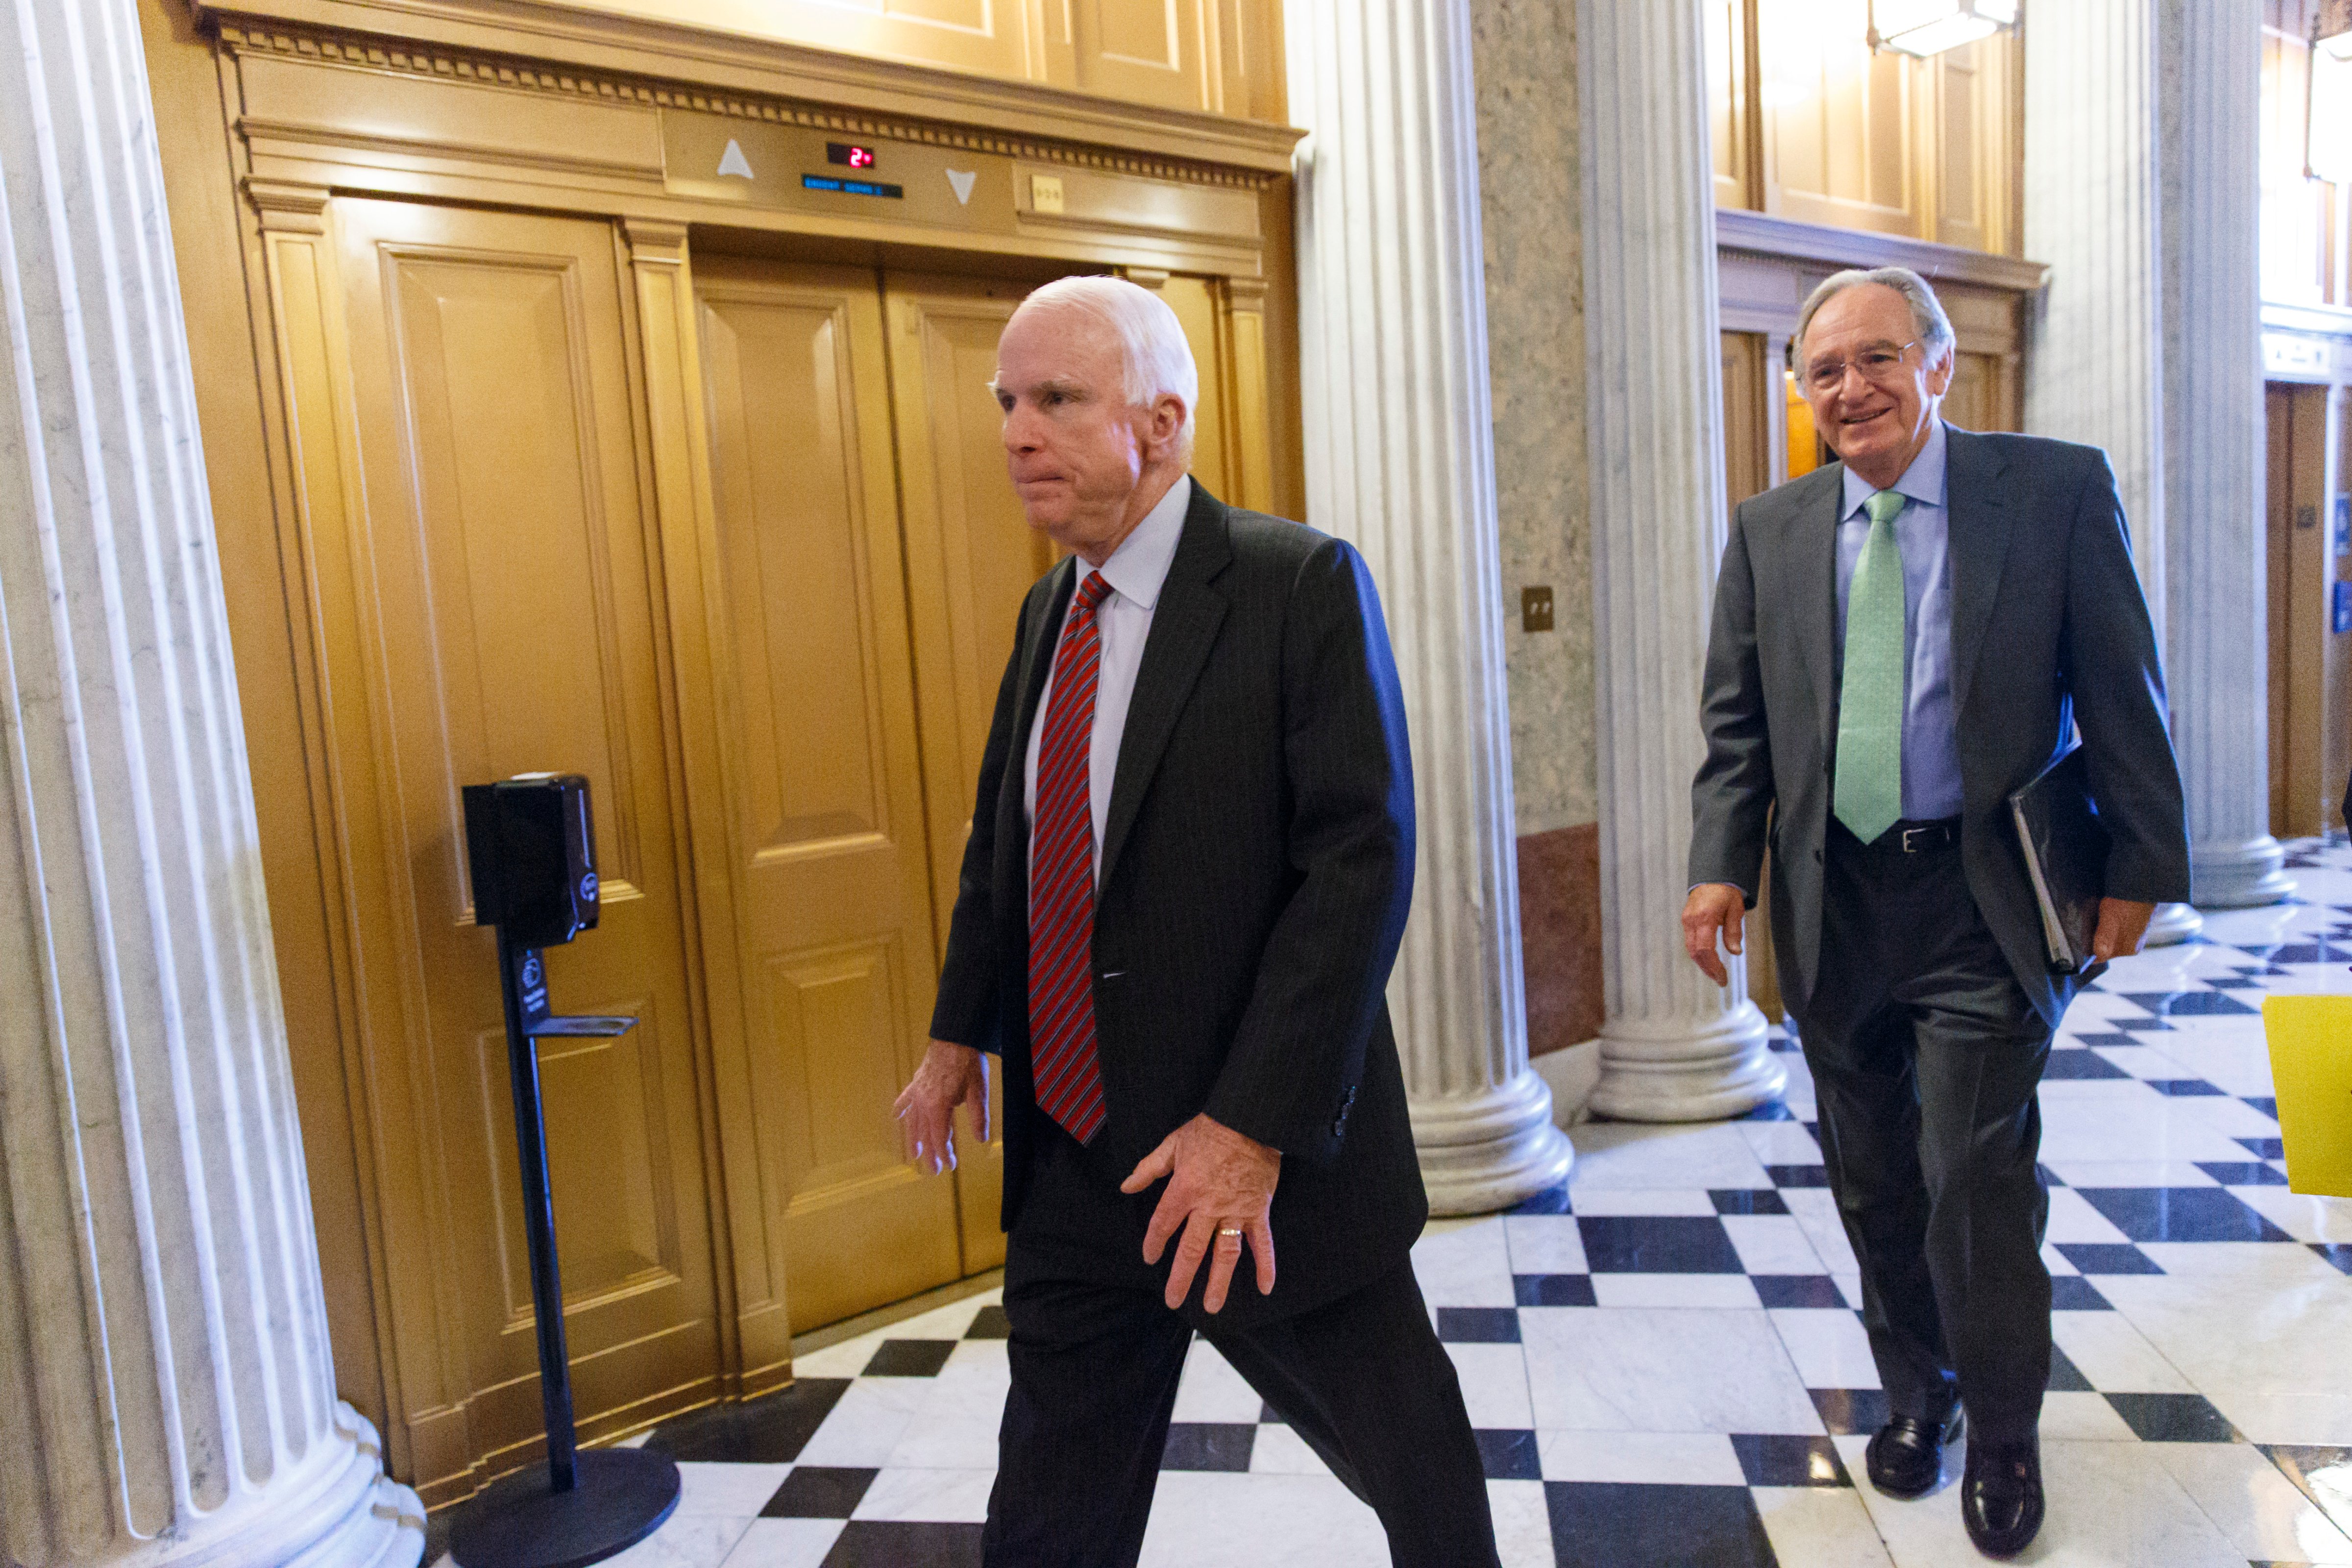 Sen. John McCain, R-Ariz., left, and Sen. Tom Harkin, D-Iowa, right, and other senators come and go from the chamber during votes at the Capitol in Washington, Tuesday, Feb. 25, 2014. (J. Scott Applewhite—AP)